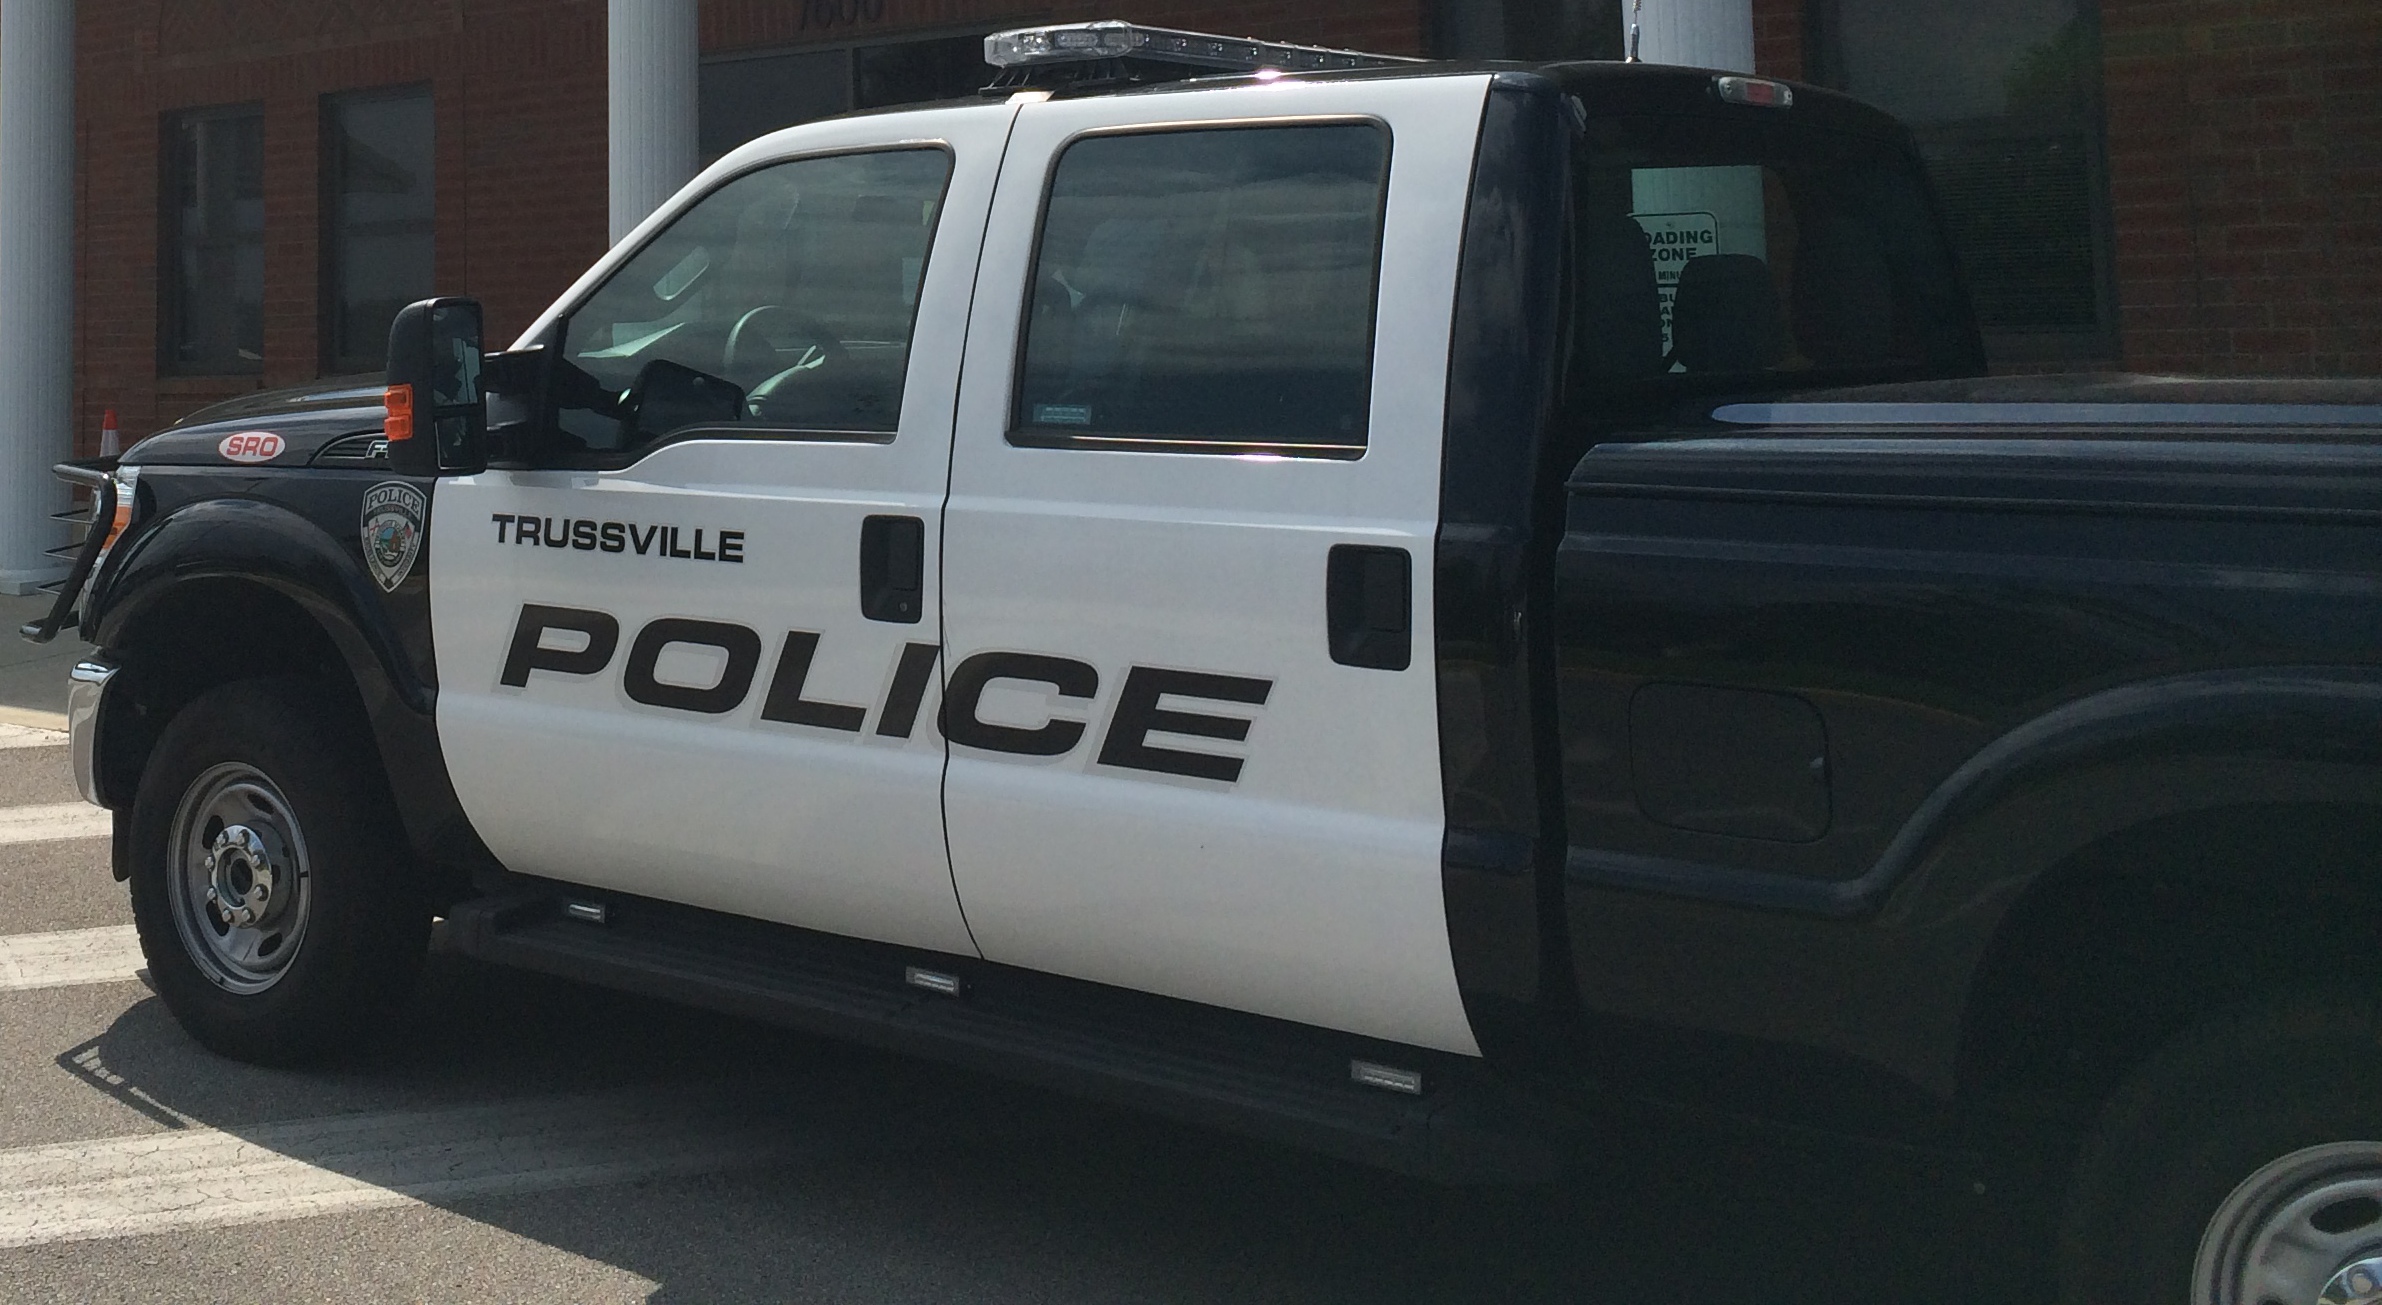 String of car break-ins overnight Monday and Tuesday in Trussville